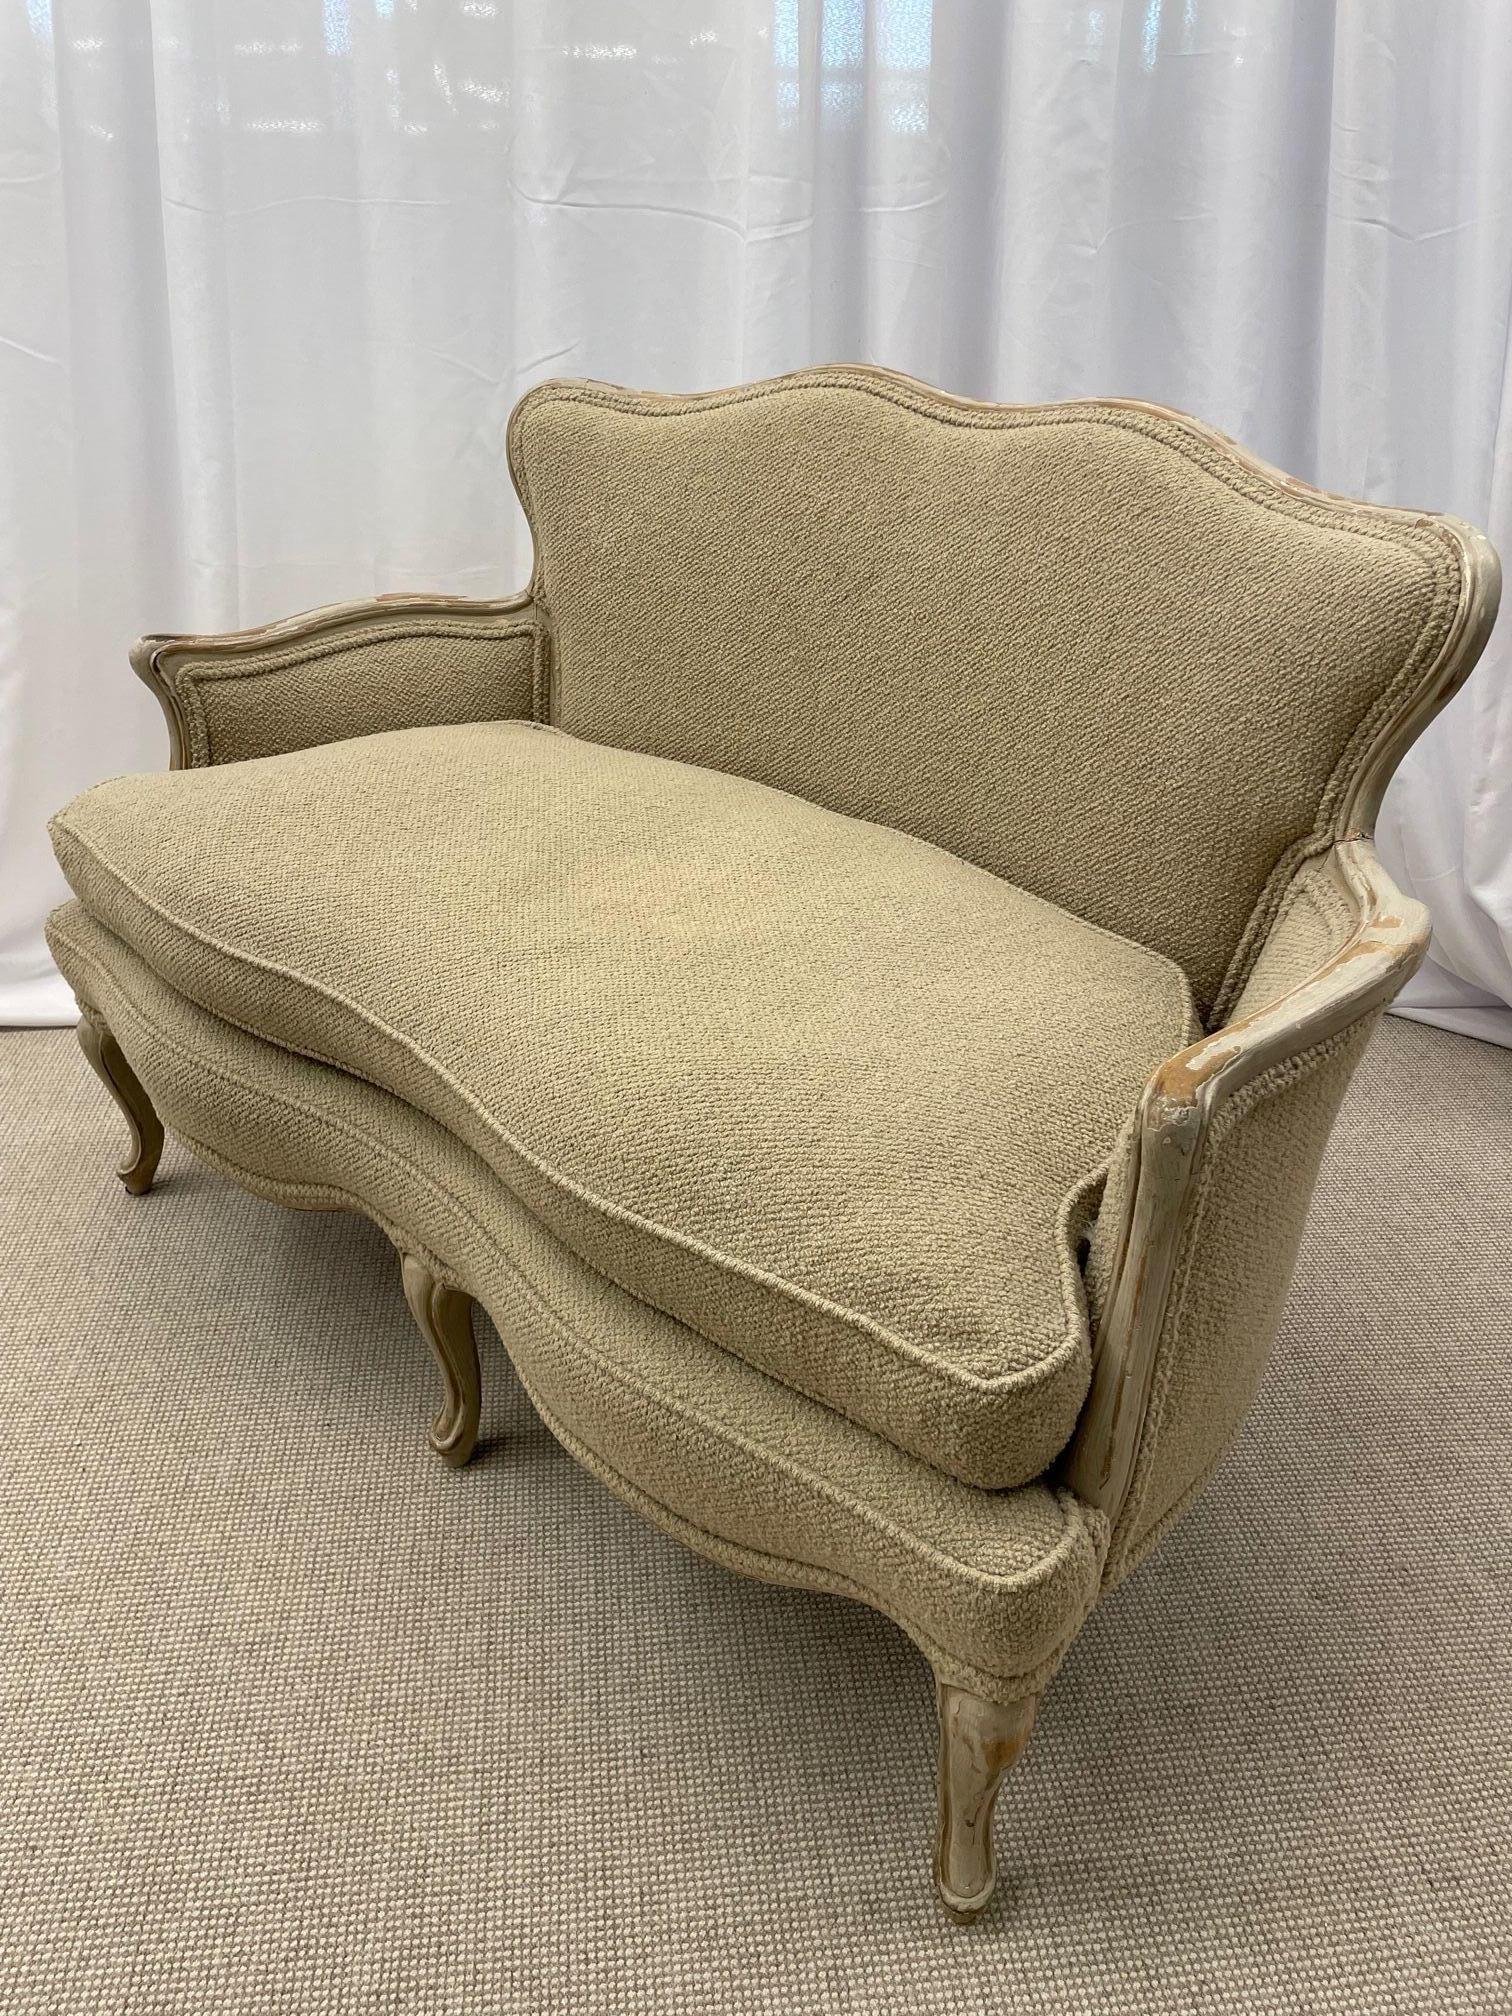 Swedish style parcel gilt and paint decorated sofa, settee or loveseat in the Louis XV Fashion. This finely detailed settee has been recently recovered in a Beige Bouclé Fabric by John Shays. This Elegant yet rustic two person settee having a